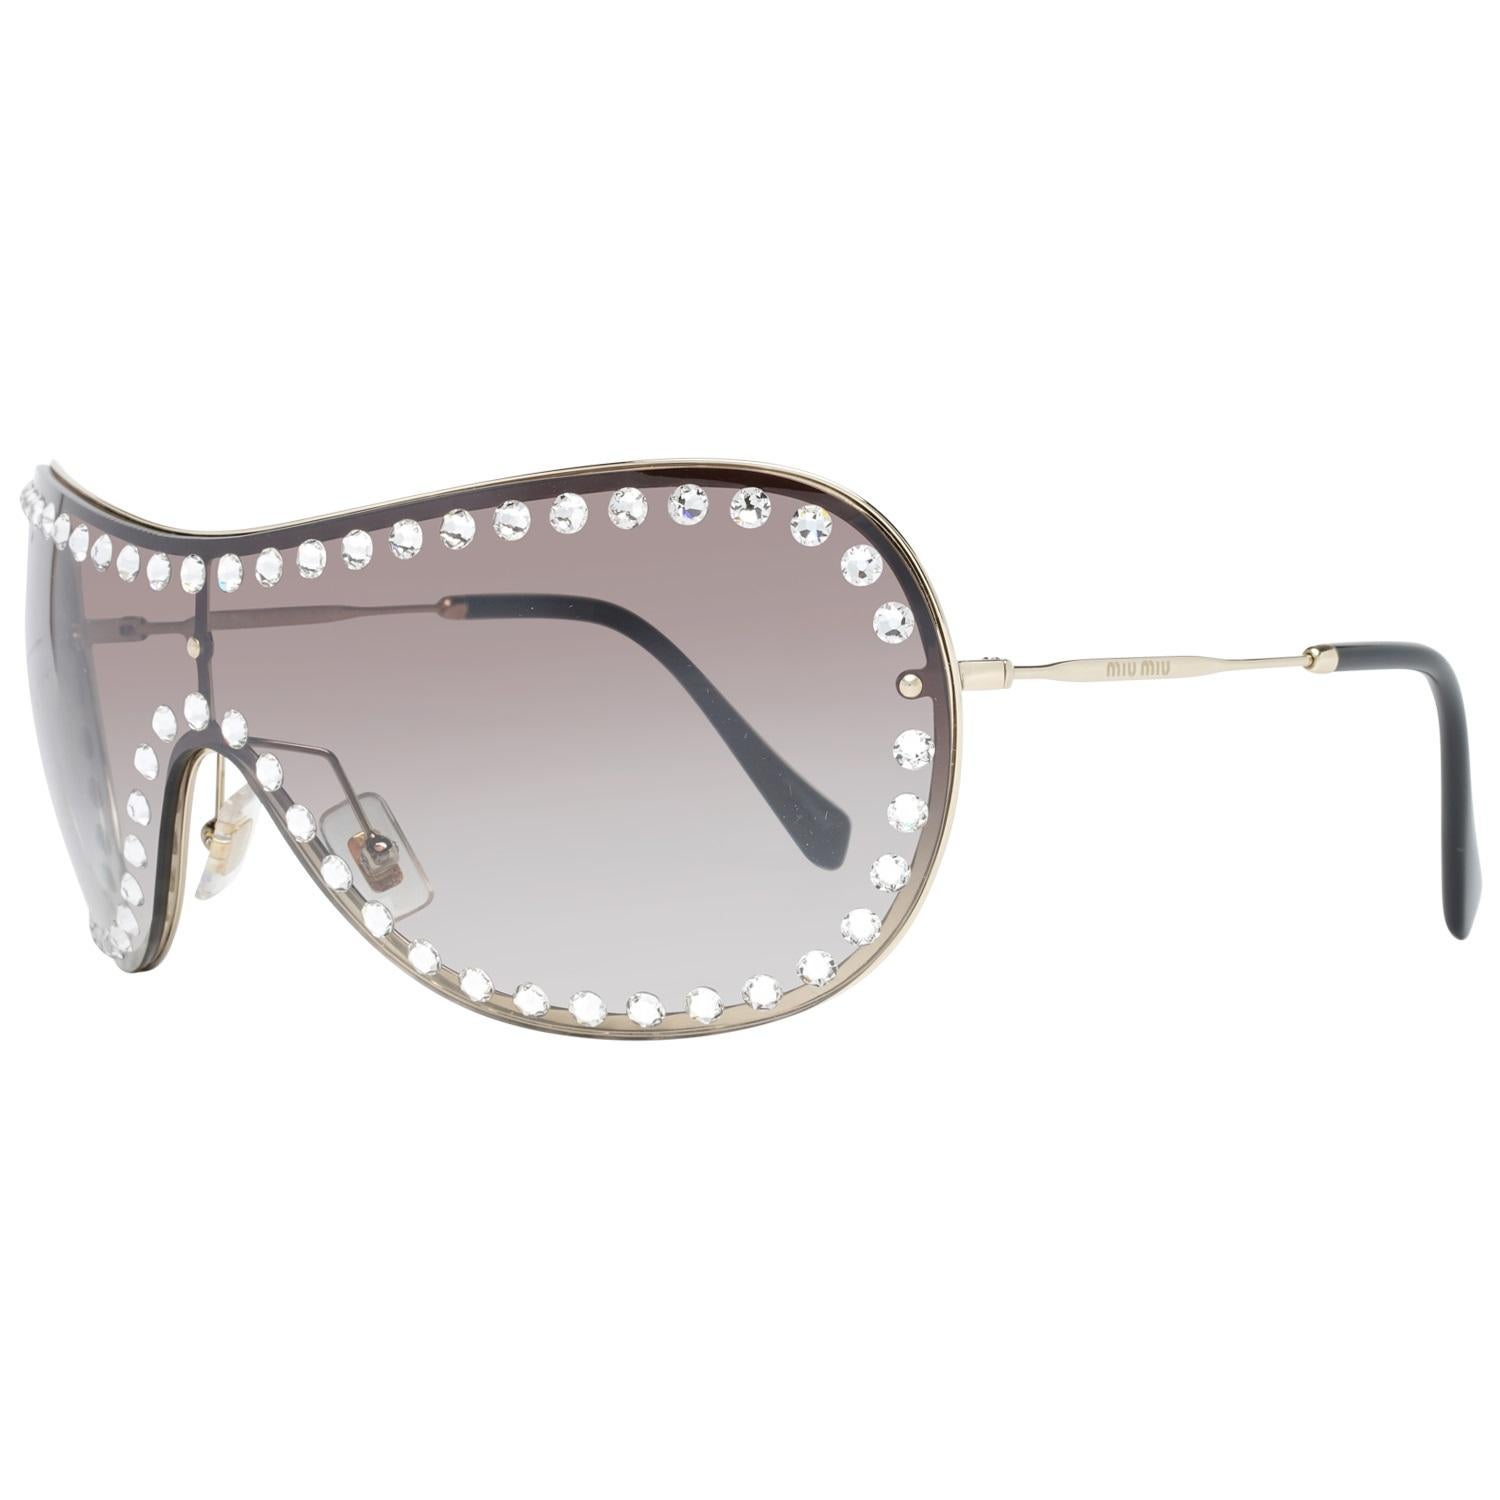 Details
MATERIAL: Metal
COLOR: Gold
MODEL: MU51VS 40ZVN5O0
GENDER: Women
COUNTRY OF MANUFACTURE: Italy
TYPE: Sunglasses
ORIGINAL CASE?: Yes
STYLE: Mono Lens
OCCASION: Casual
FEATURES: Lightweight
LENS COLOR: Grey
LENS TECHNOLOGY: Mirrored
YEAR